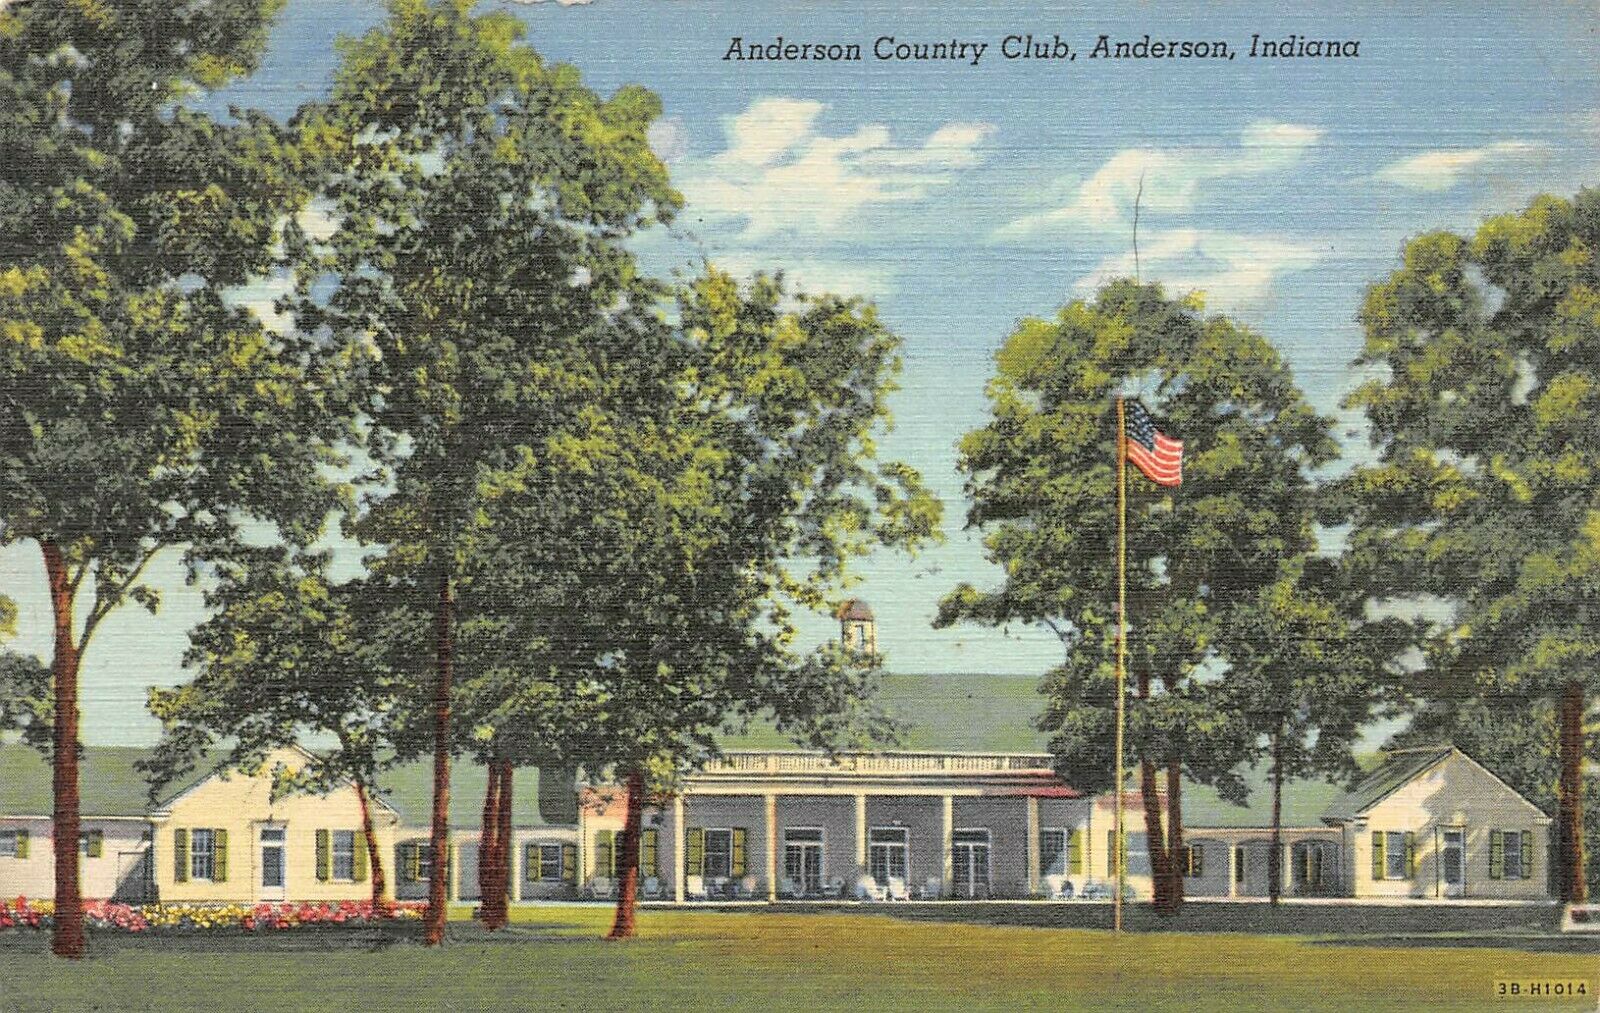 C6423 Anderson Country Club, Anderson In - 1943 Teich Linen Postcard # 3b-h1014